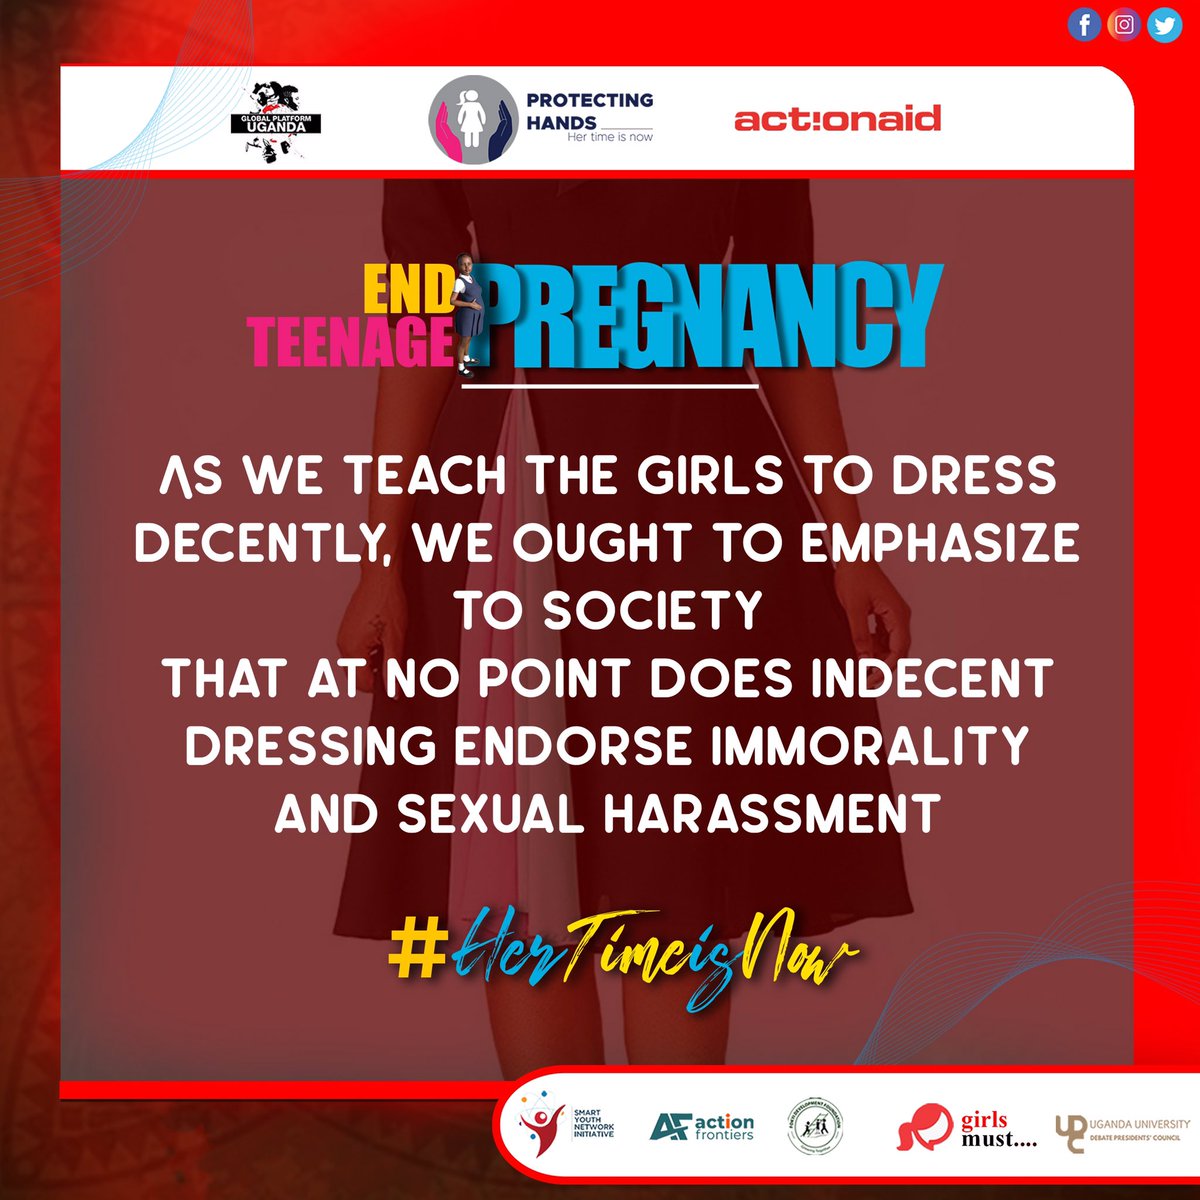 As we teach girls to dress decently, we ought to emphasize to society that at no point does indirect dressing endorse immorality and sexual harassment 🌚🌚🌚🌚
@FokyiFoundation    @ug_girls @PrimusBahiigi @UN_RCNYO @UDPC4 @UNinUganda
@SDGsUG @global_uganda 

#HerTimeIsNow